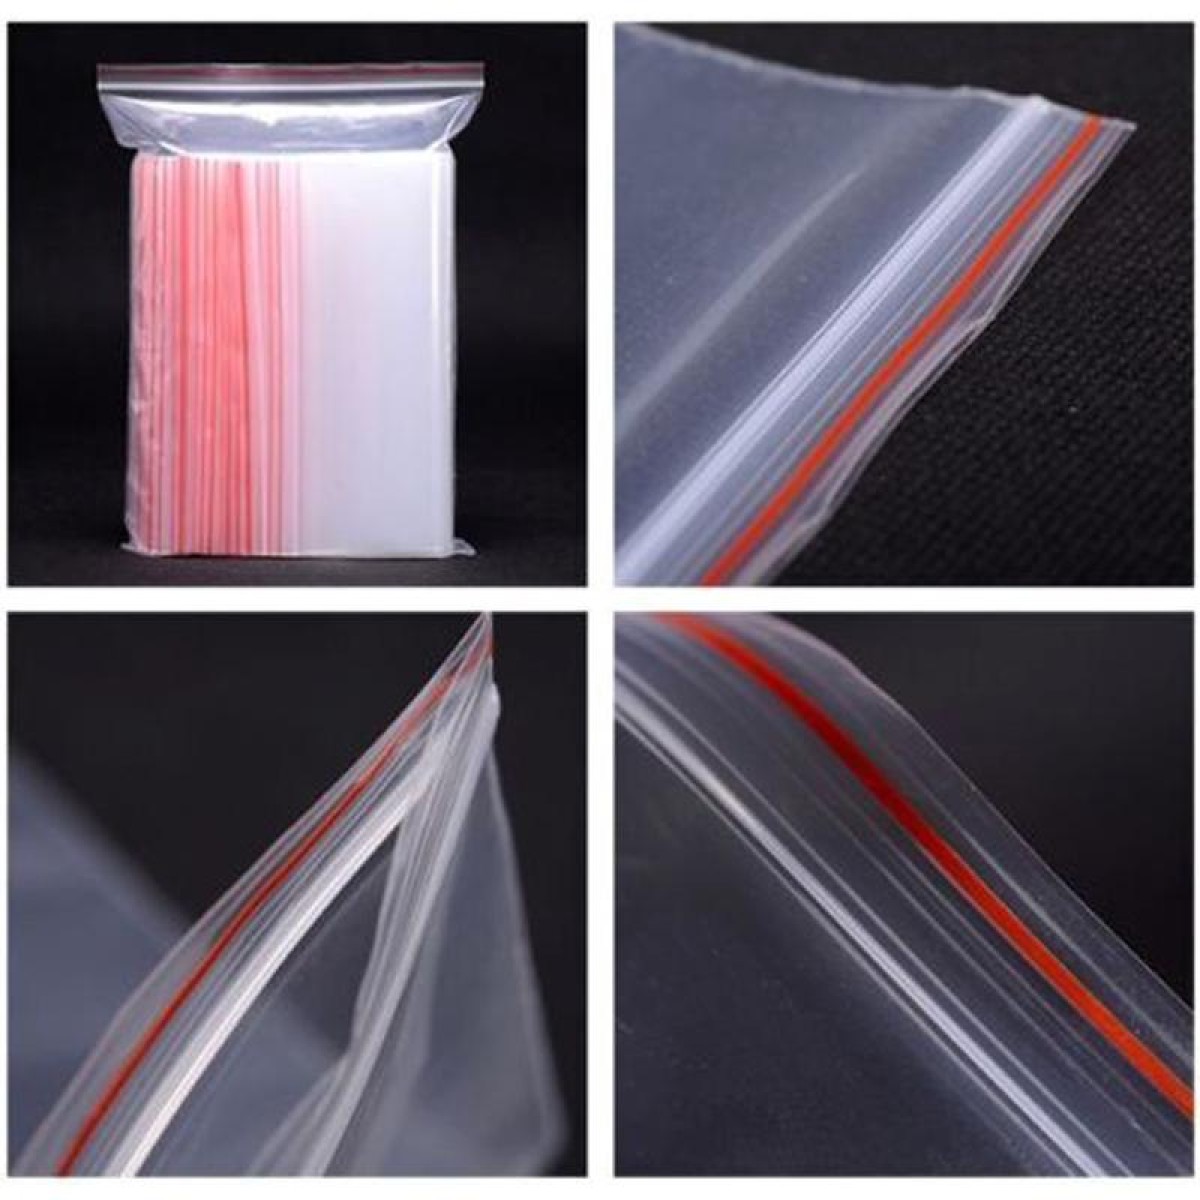 100pcs/pack PE Self Sealing Clear Zip Lock Packaging Bag, 6cm x 9cm, Custom Printing and Size are welcome